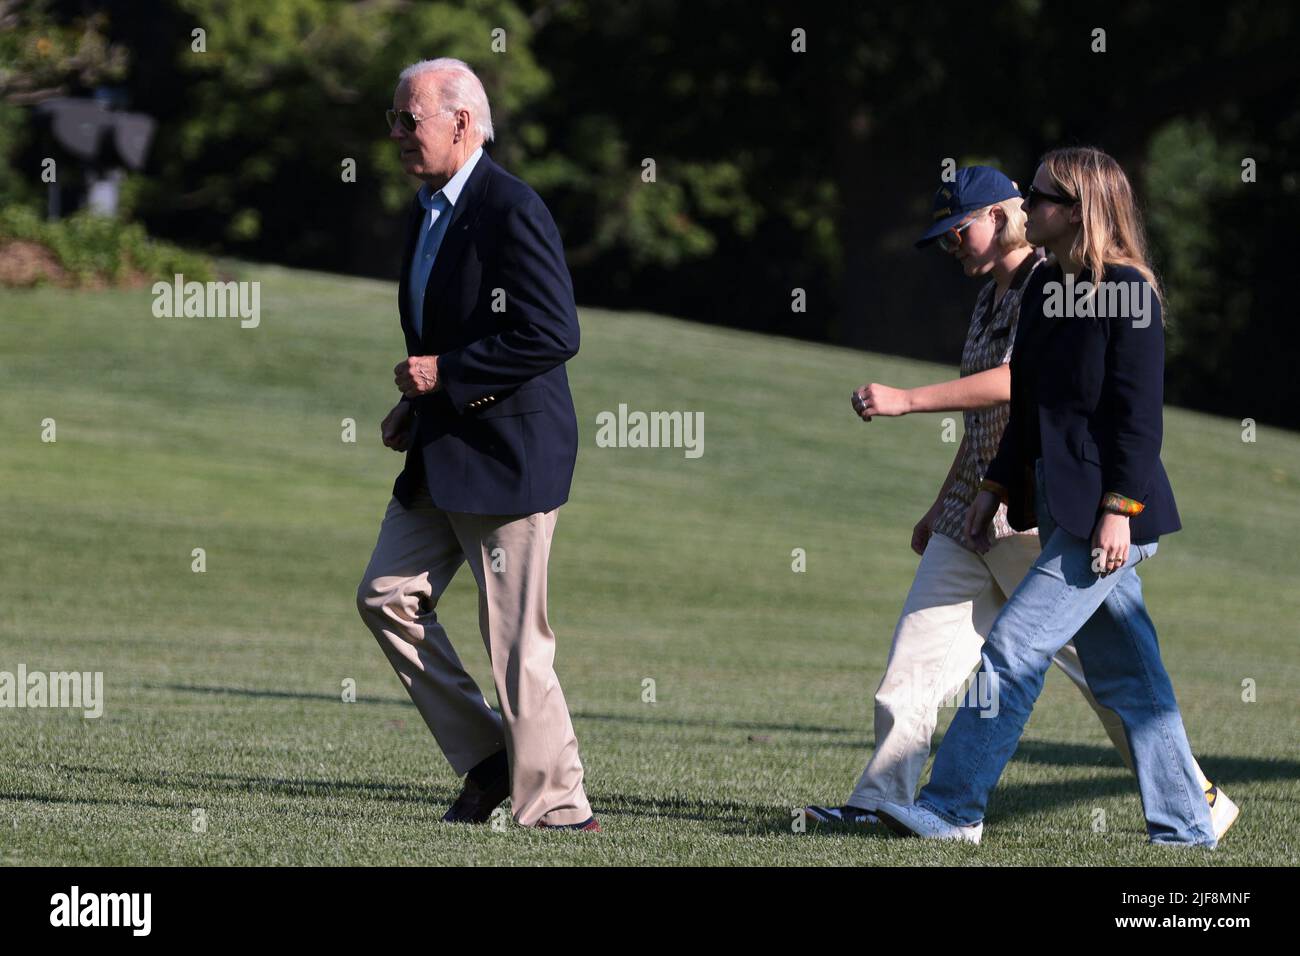 President Joe Biden, arrives on the South Lawn of the White House alongside his 2 granddaughters, Finnegan Biden and Maisy Biden, on June 30, 2022 in Washington, DC. Biden returned to Washington after attending summits in Germany and Spain.Photo by Oliver Contreras/Pool/ABACAPRESS.COM Stock Photo